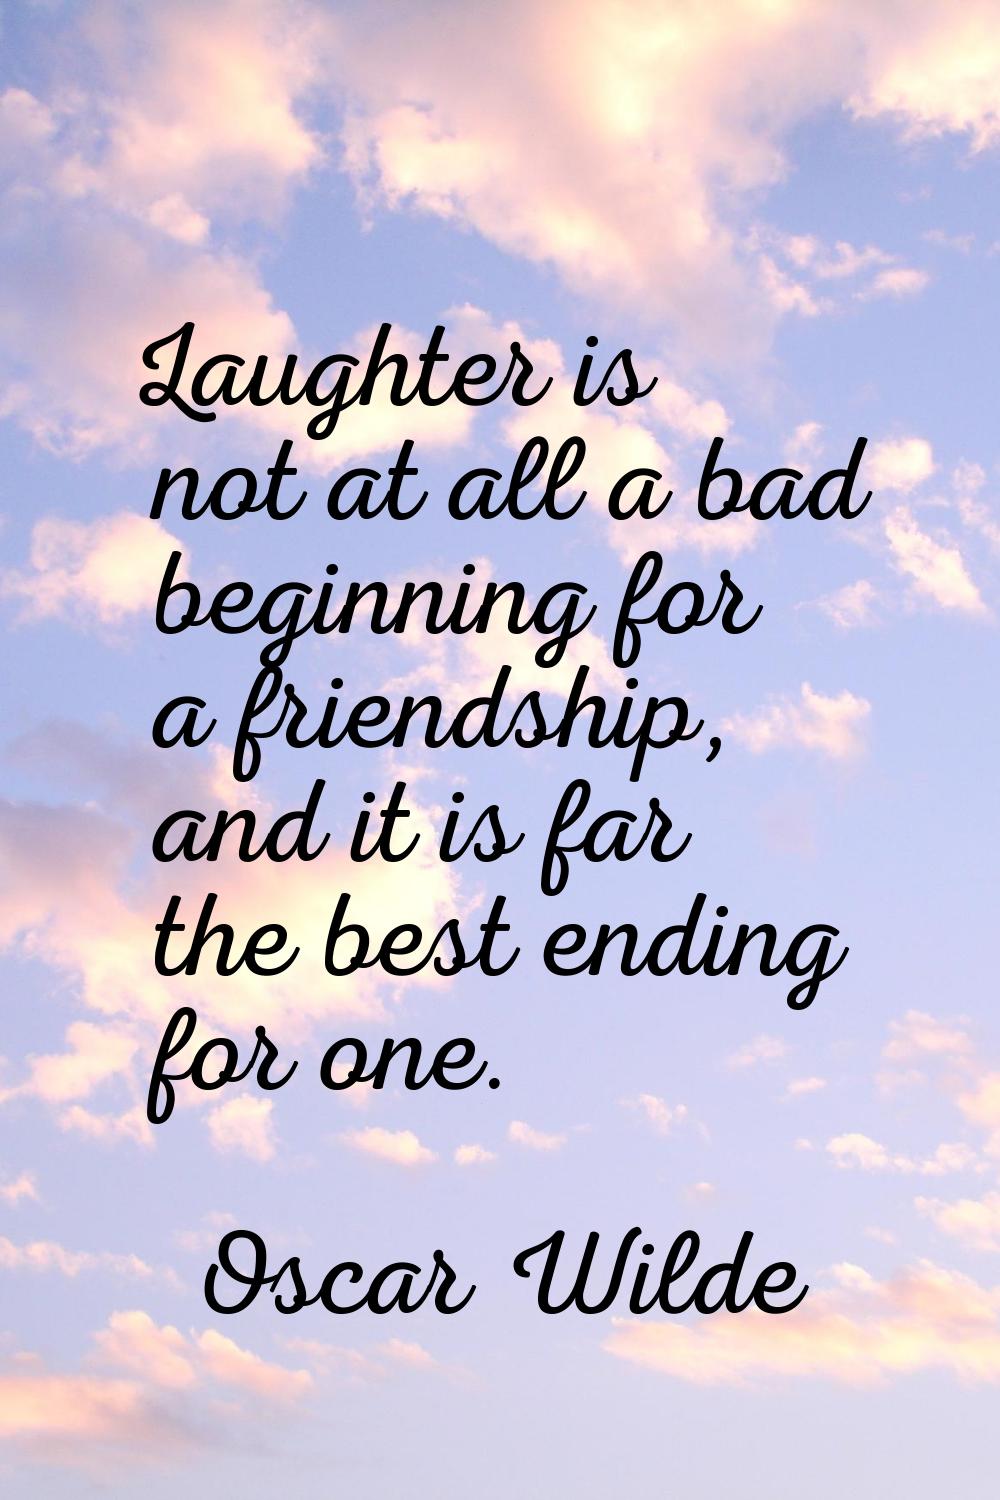 Laughter is not at all a bad beginning for a friendship, and it is far the best ending for one.